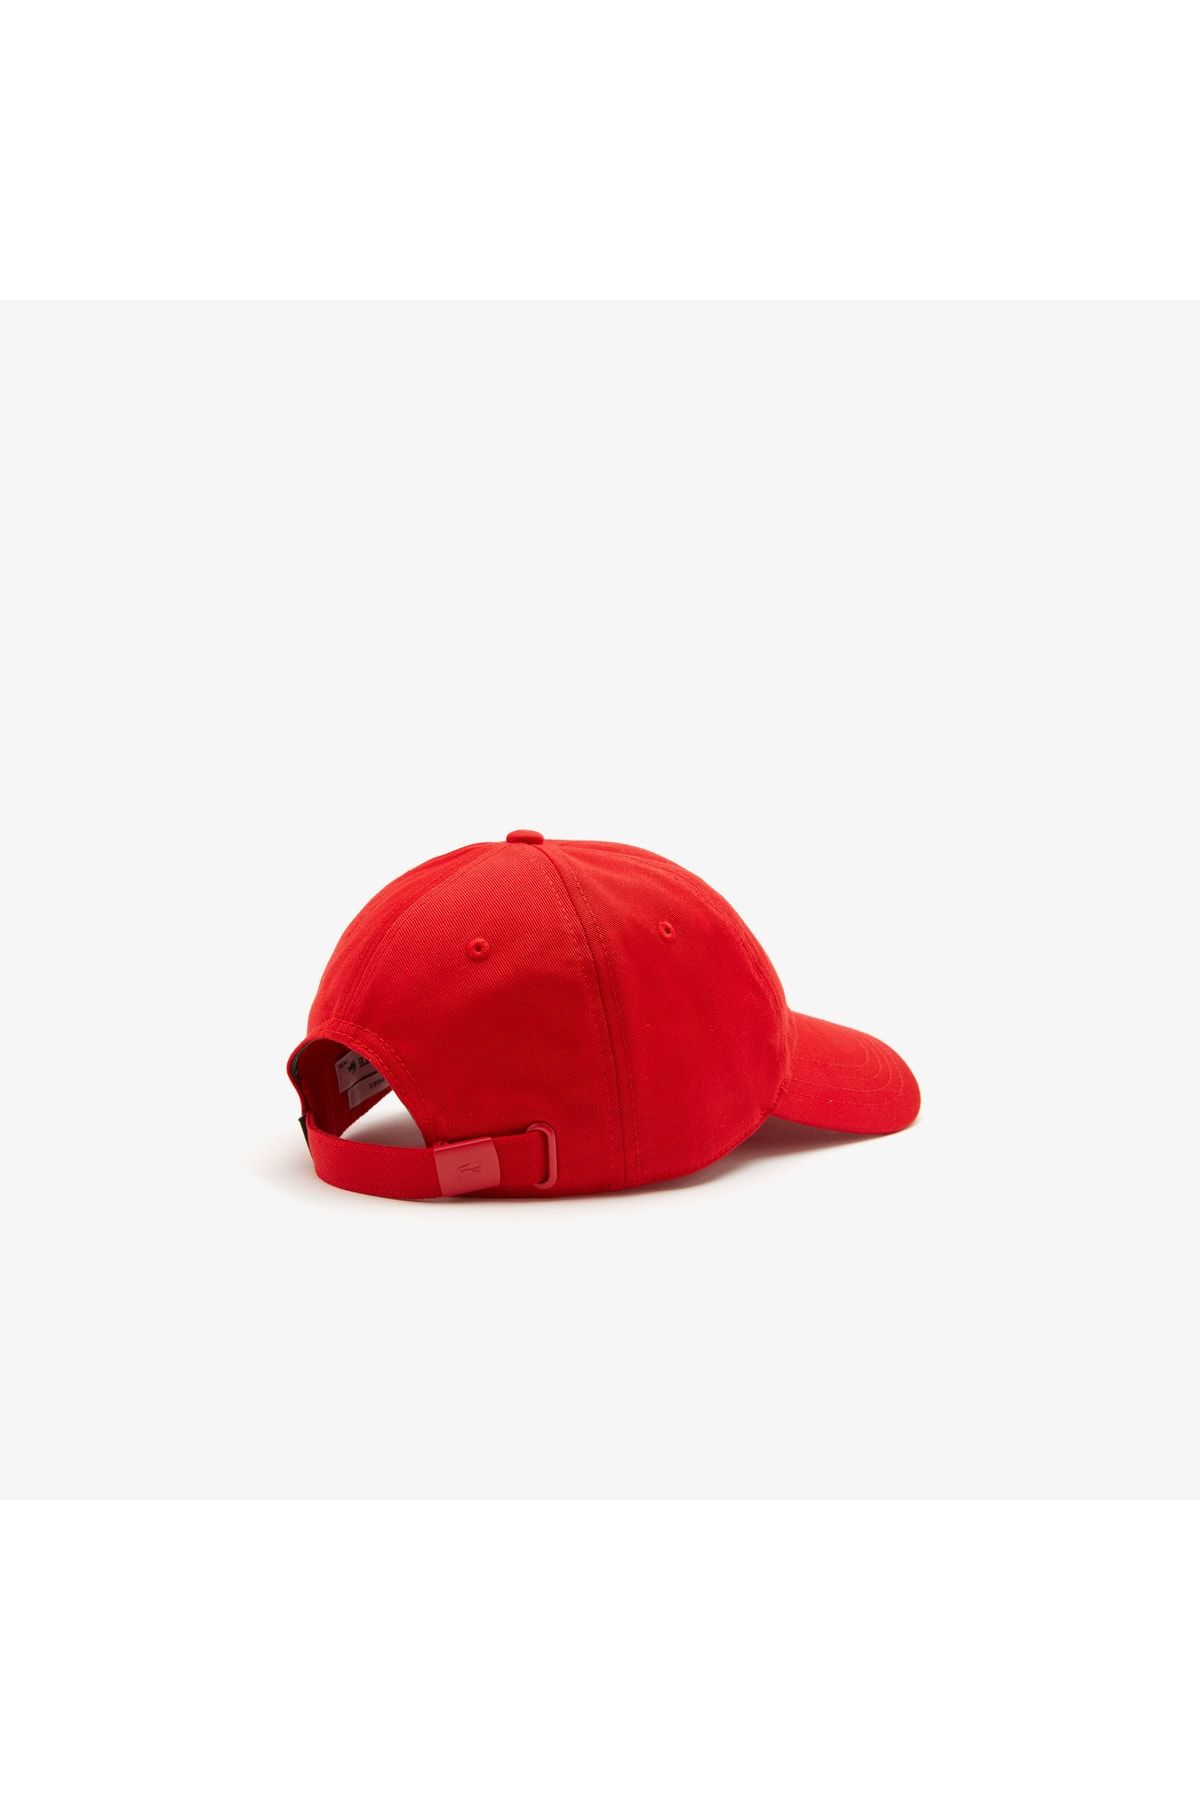 Lacoste unisex red hat